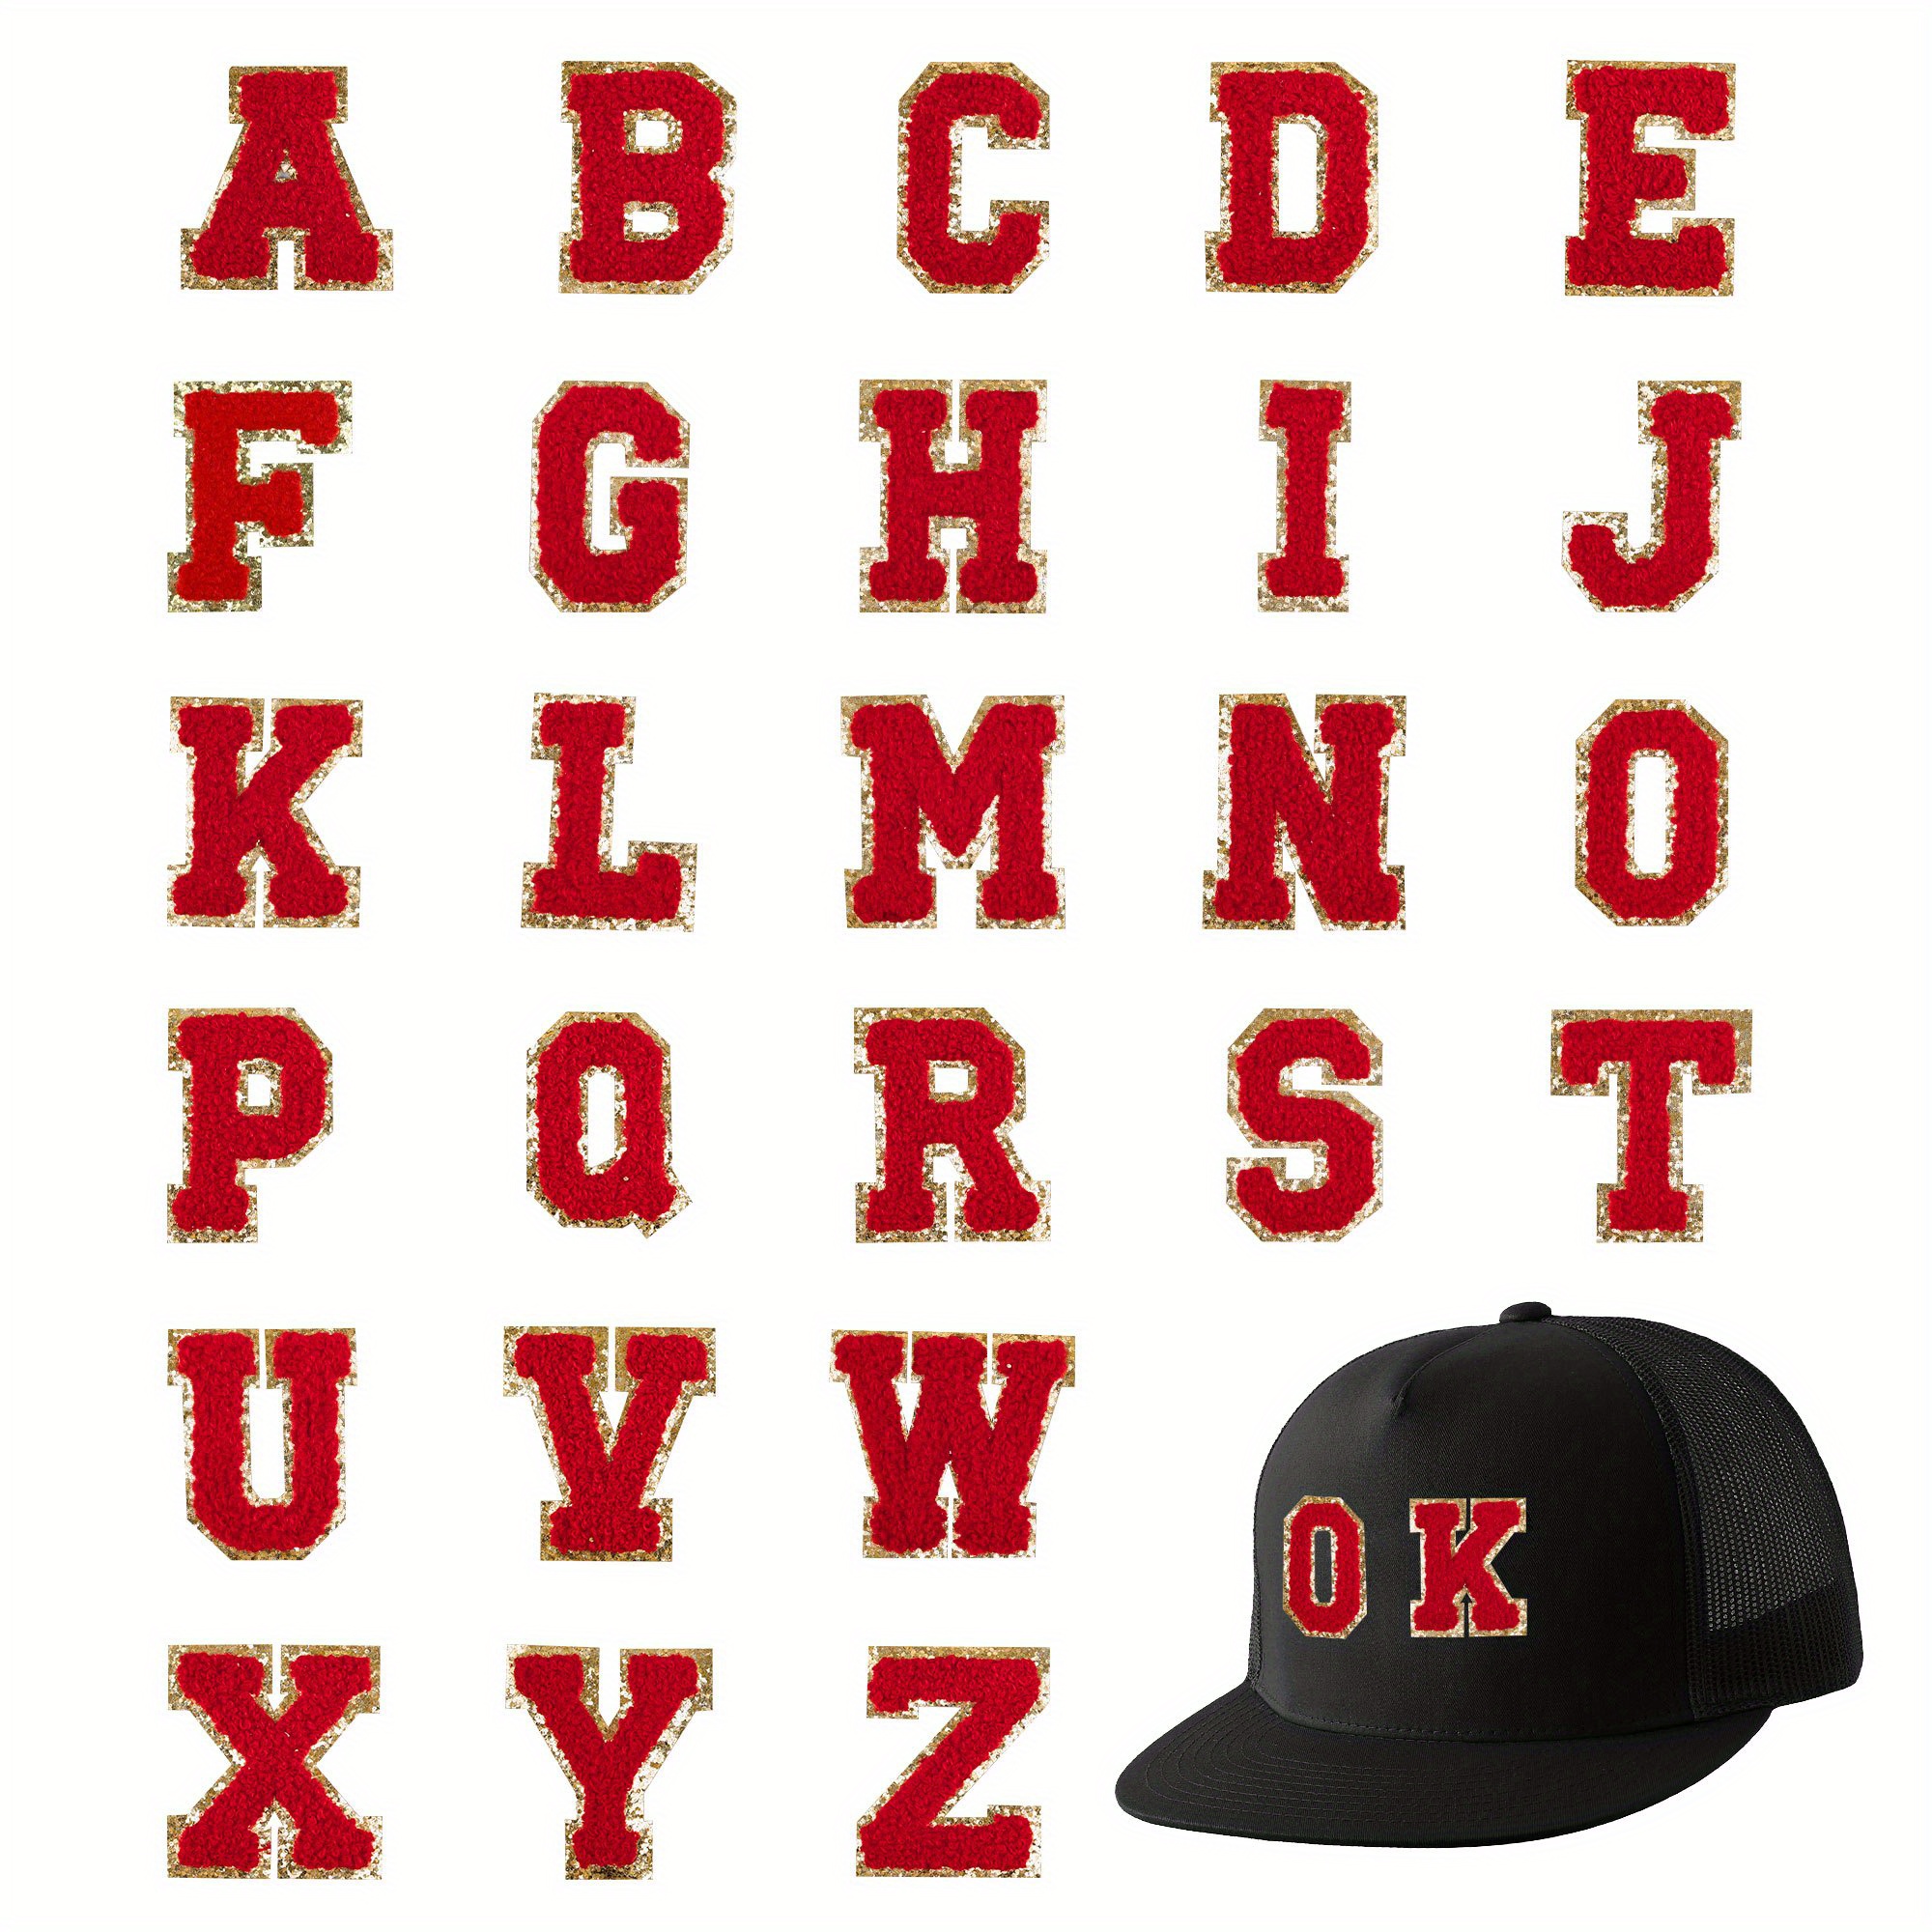 2 Sheets Iron On Letters For Clothing ,guangyintong HTV Heat Transfer Vinyl  Alphanumeric Design For DIY Hats Clothes Bags Etc.